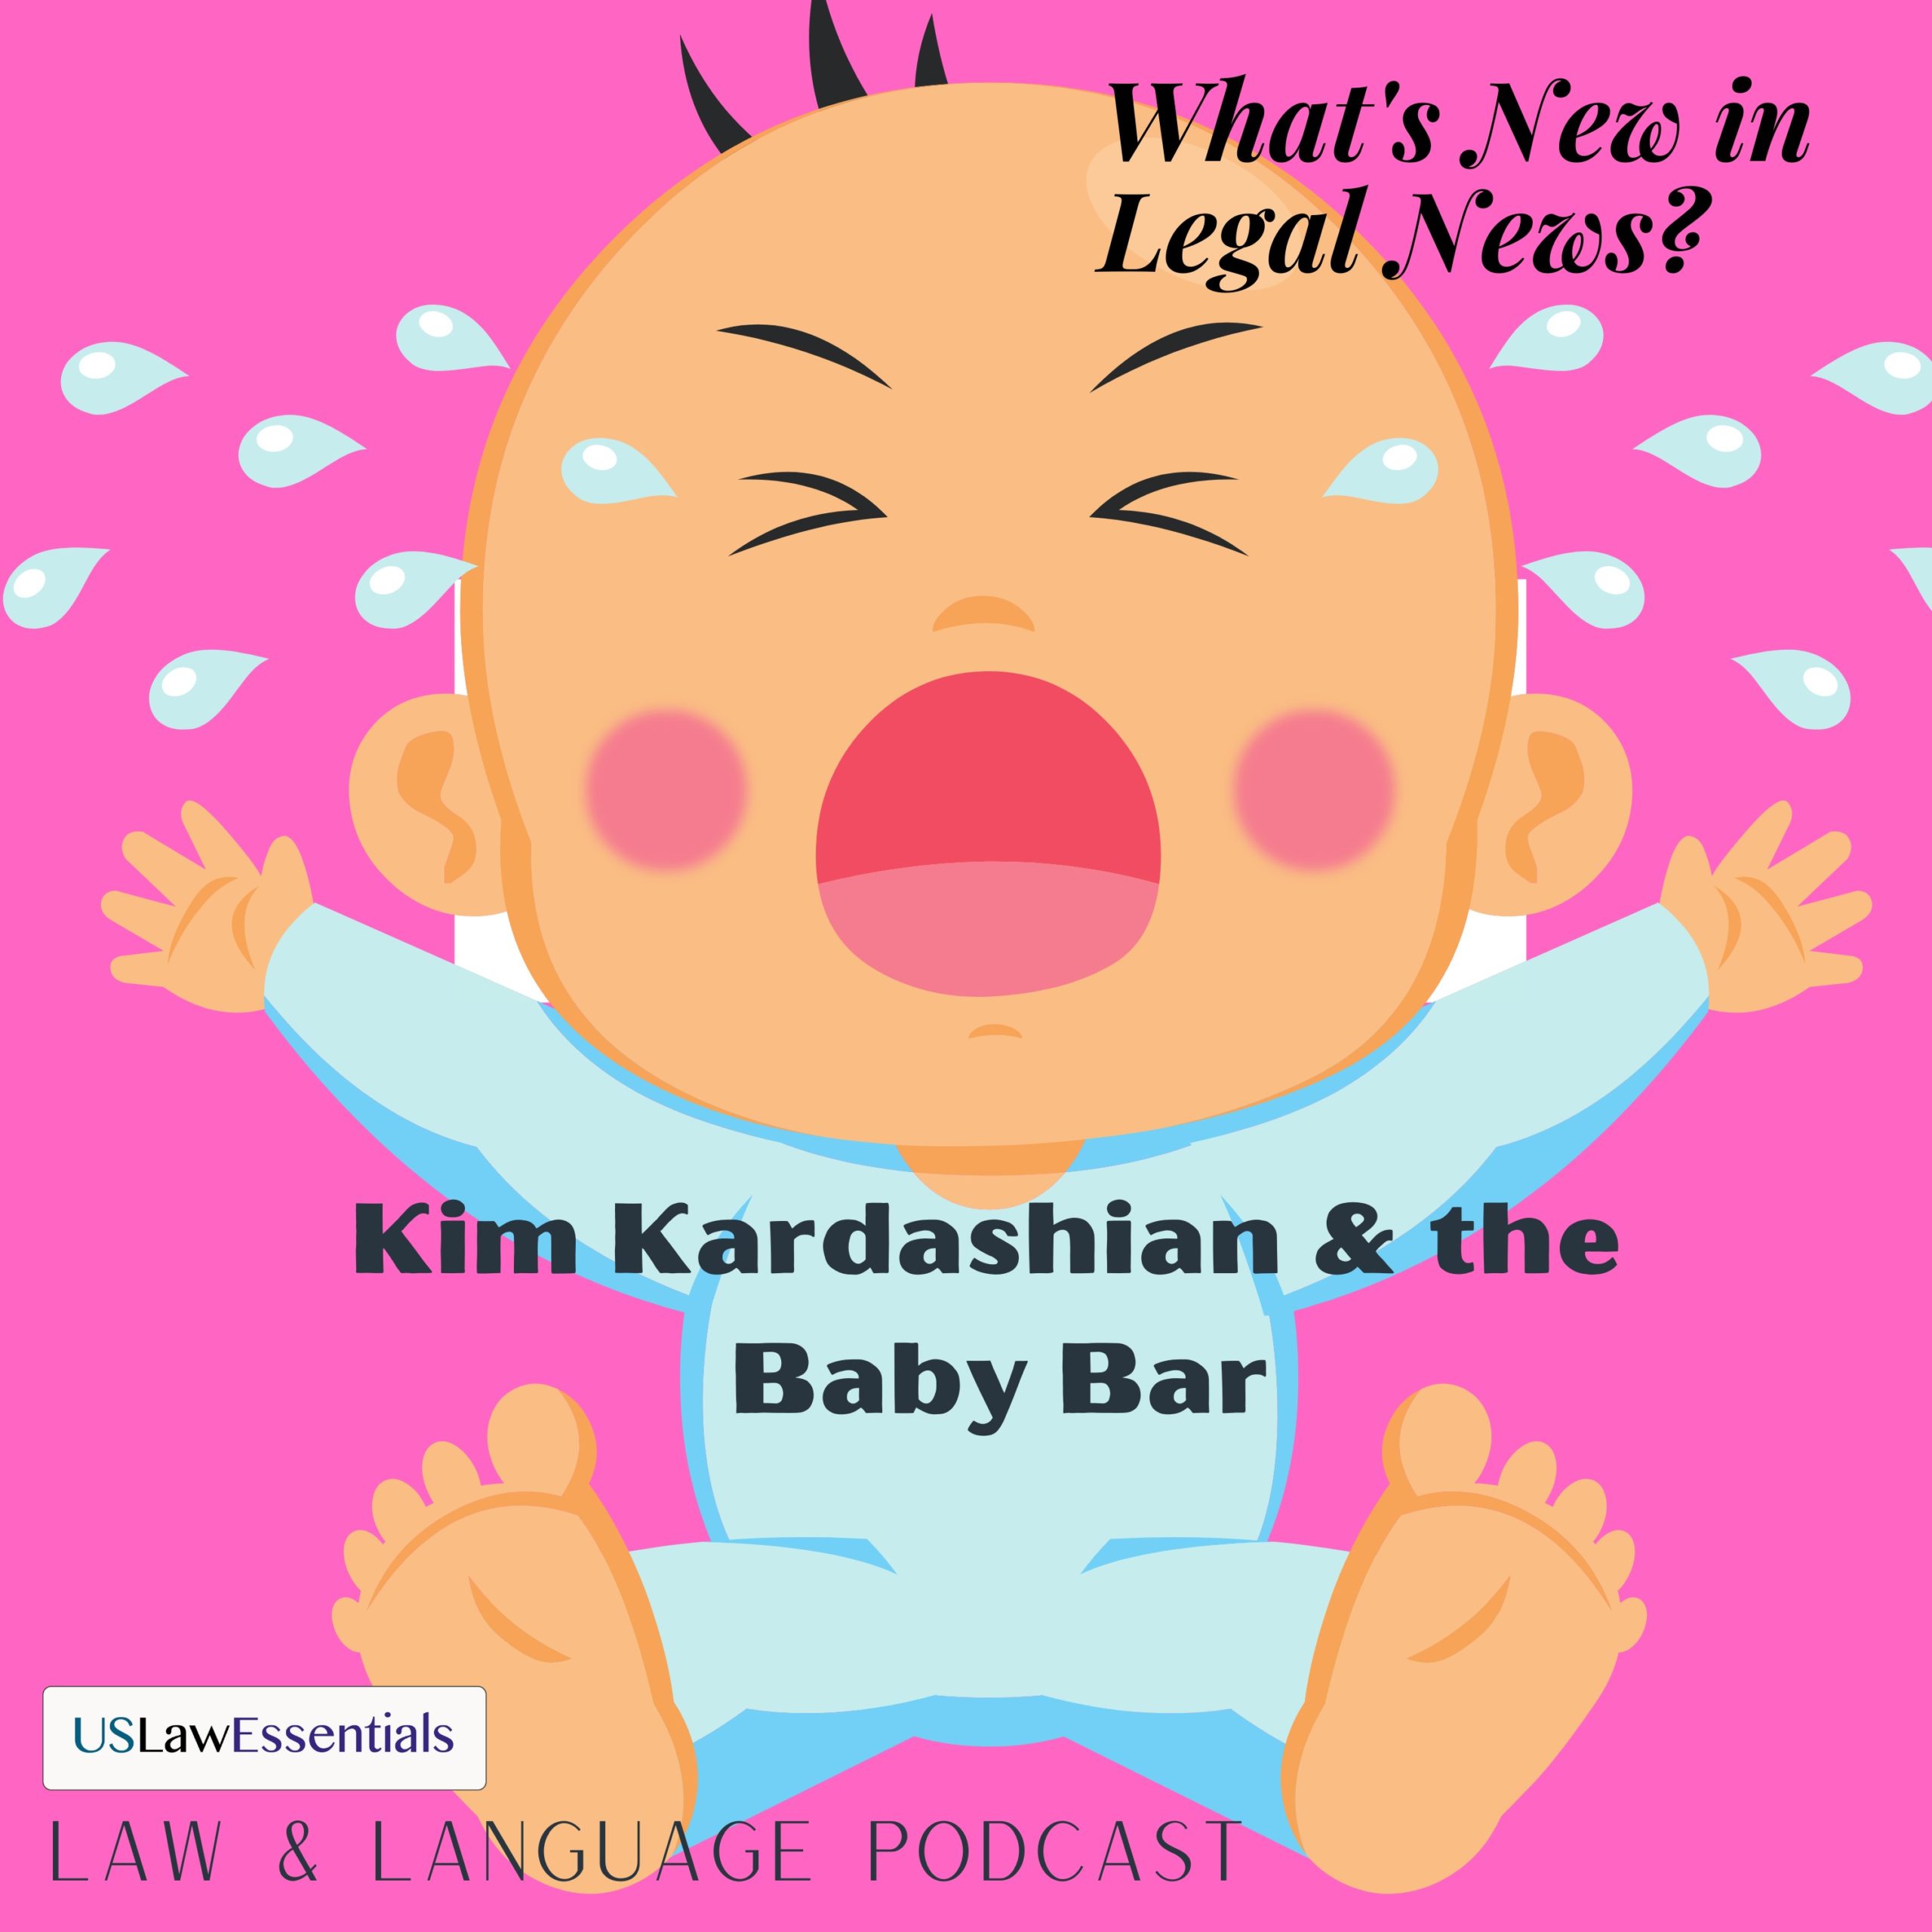 What’s New in Legal News: Kim Kardashian and the Baby Bar